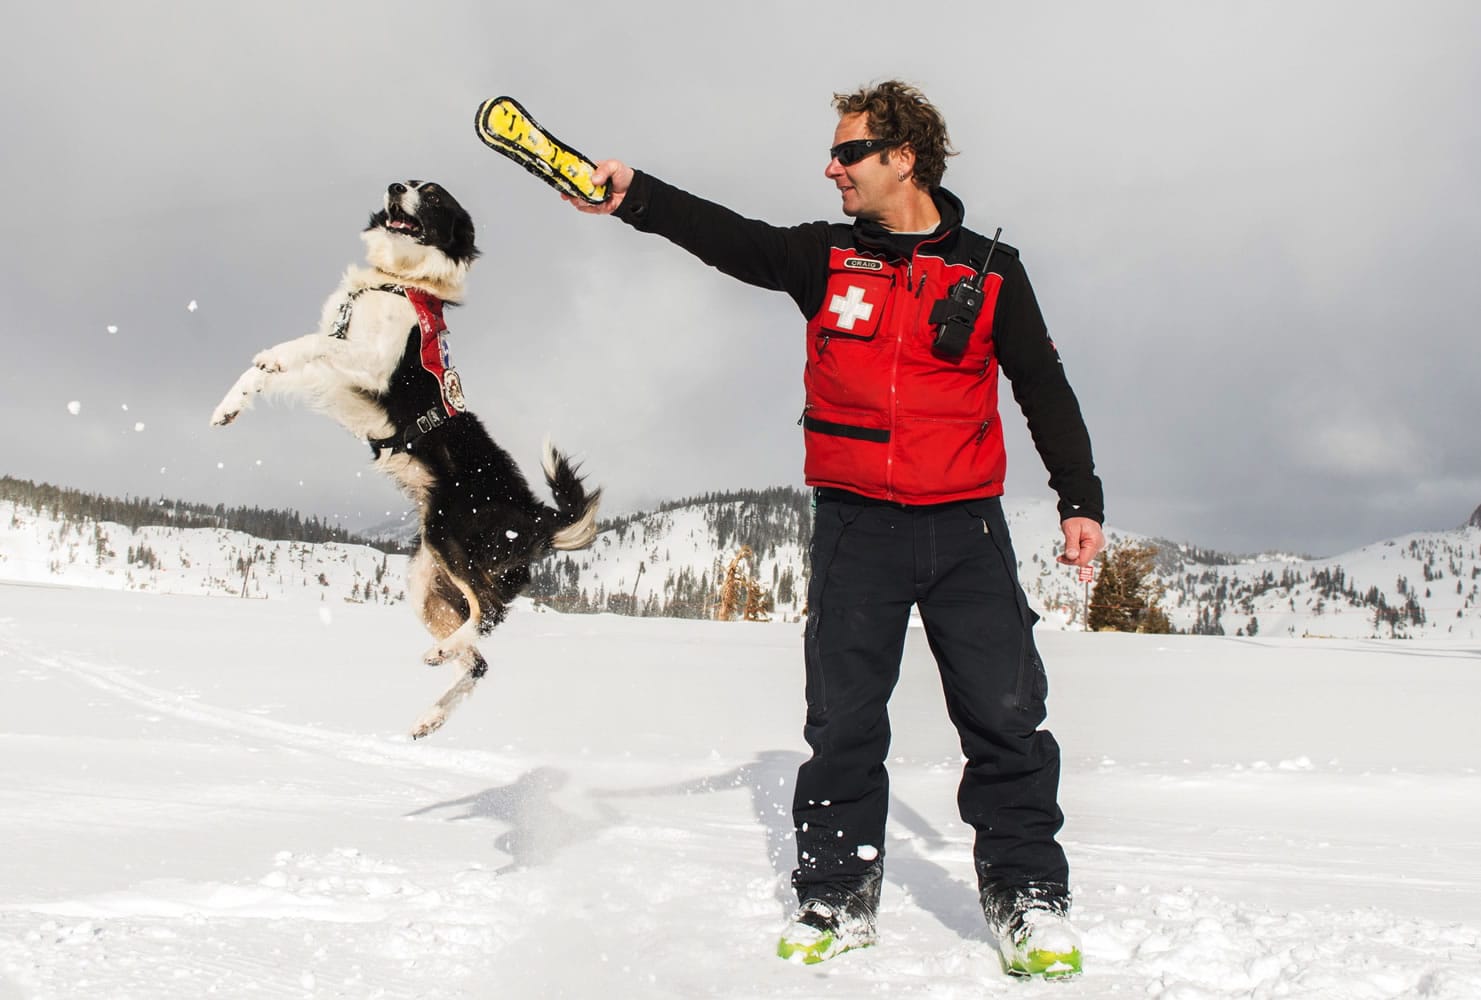 Dog supervisor Craig Noble puts his border collie Wylee through some paces on the mountain in Olympic Valley, Calif. He has Squaw Valley Alpine Meadows and Crested Butte Mountain Resort all up to the same Canadian Avalanche Rescue Dog Association standards.